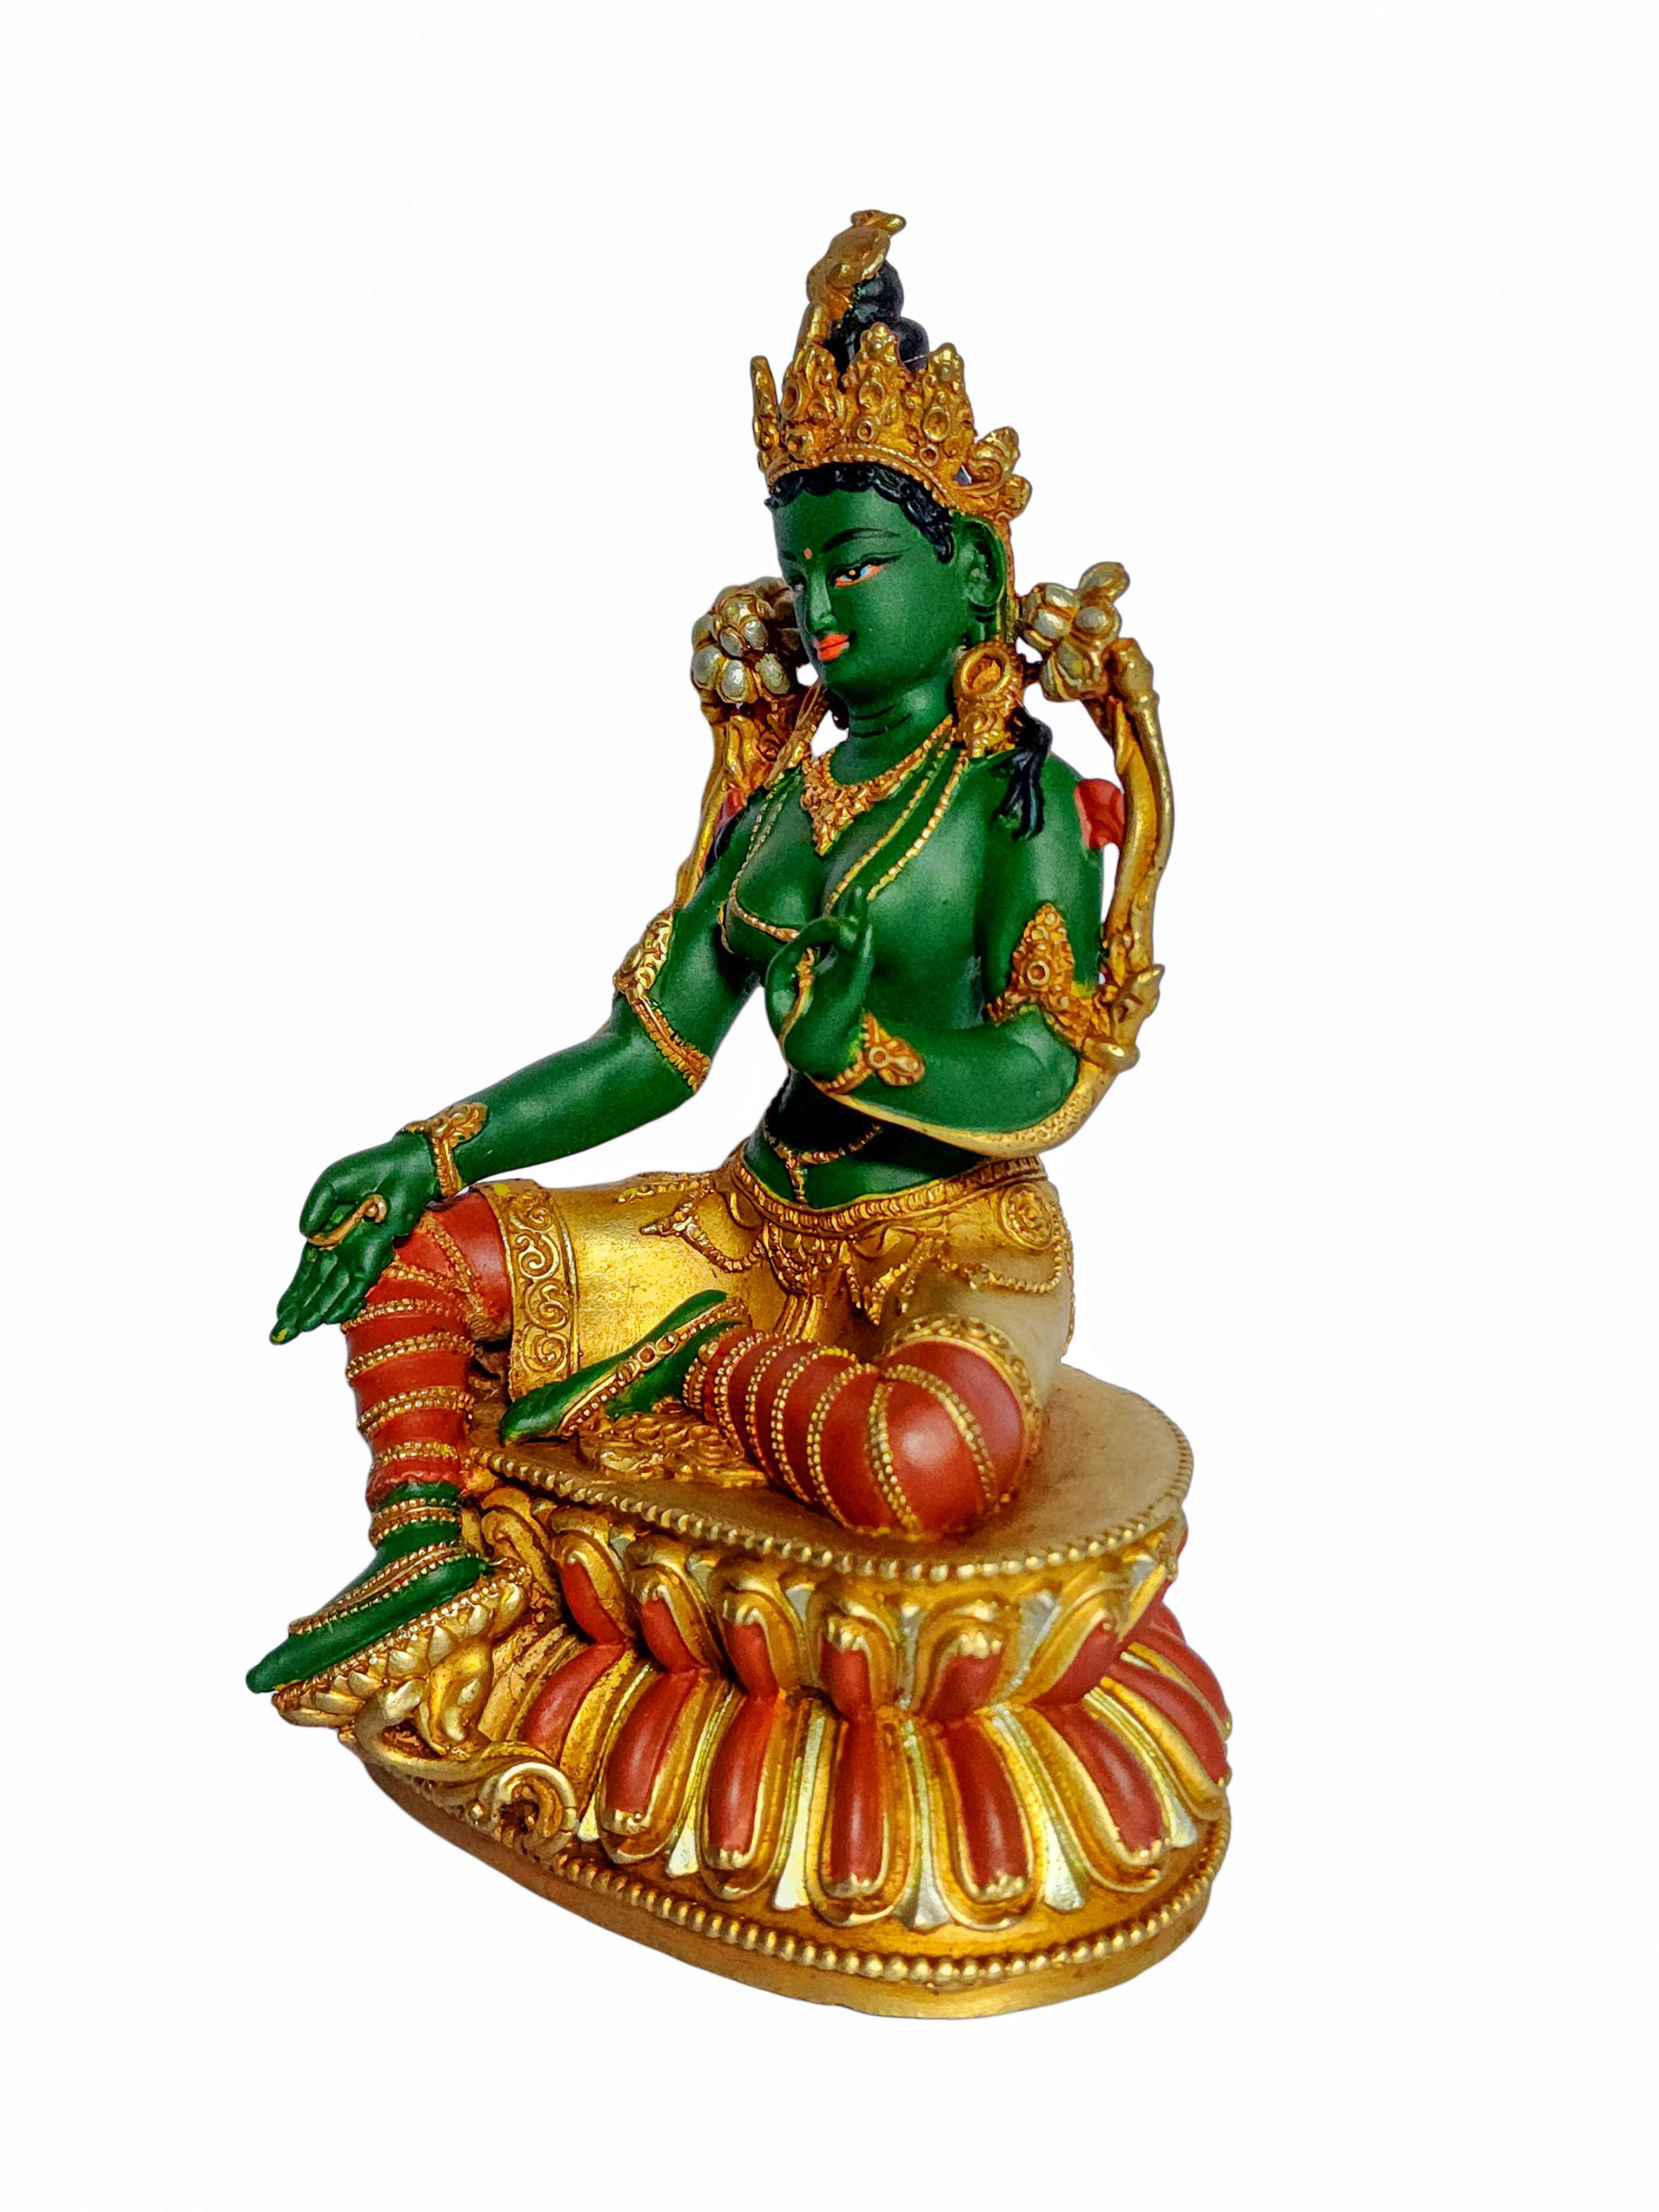 Green Tara Buddhist Statue - partly Gold Plated With Carving And traditional Color Painted